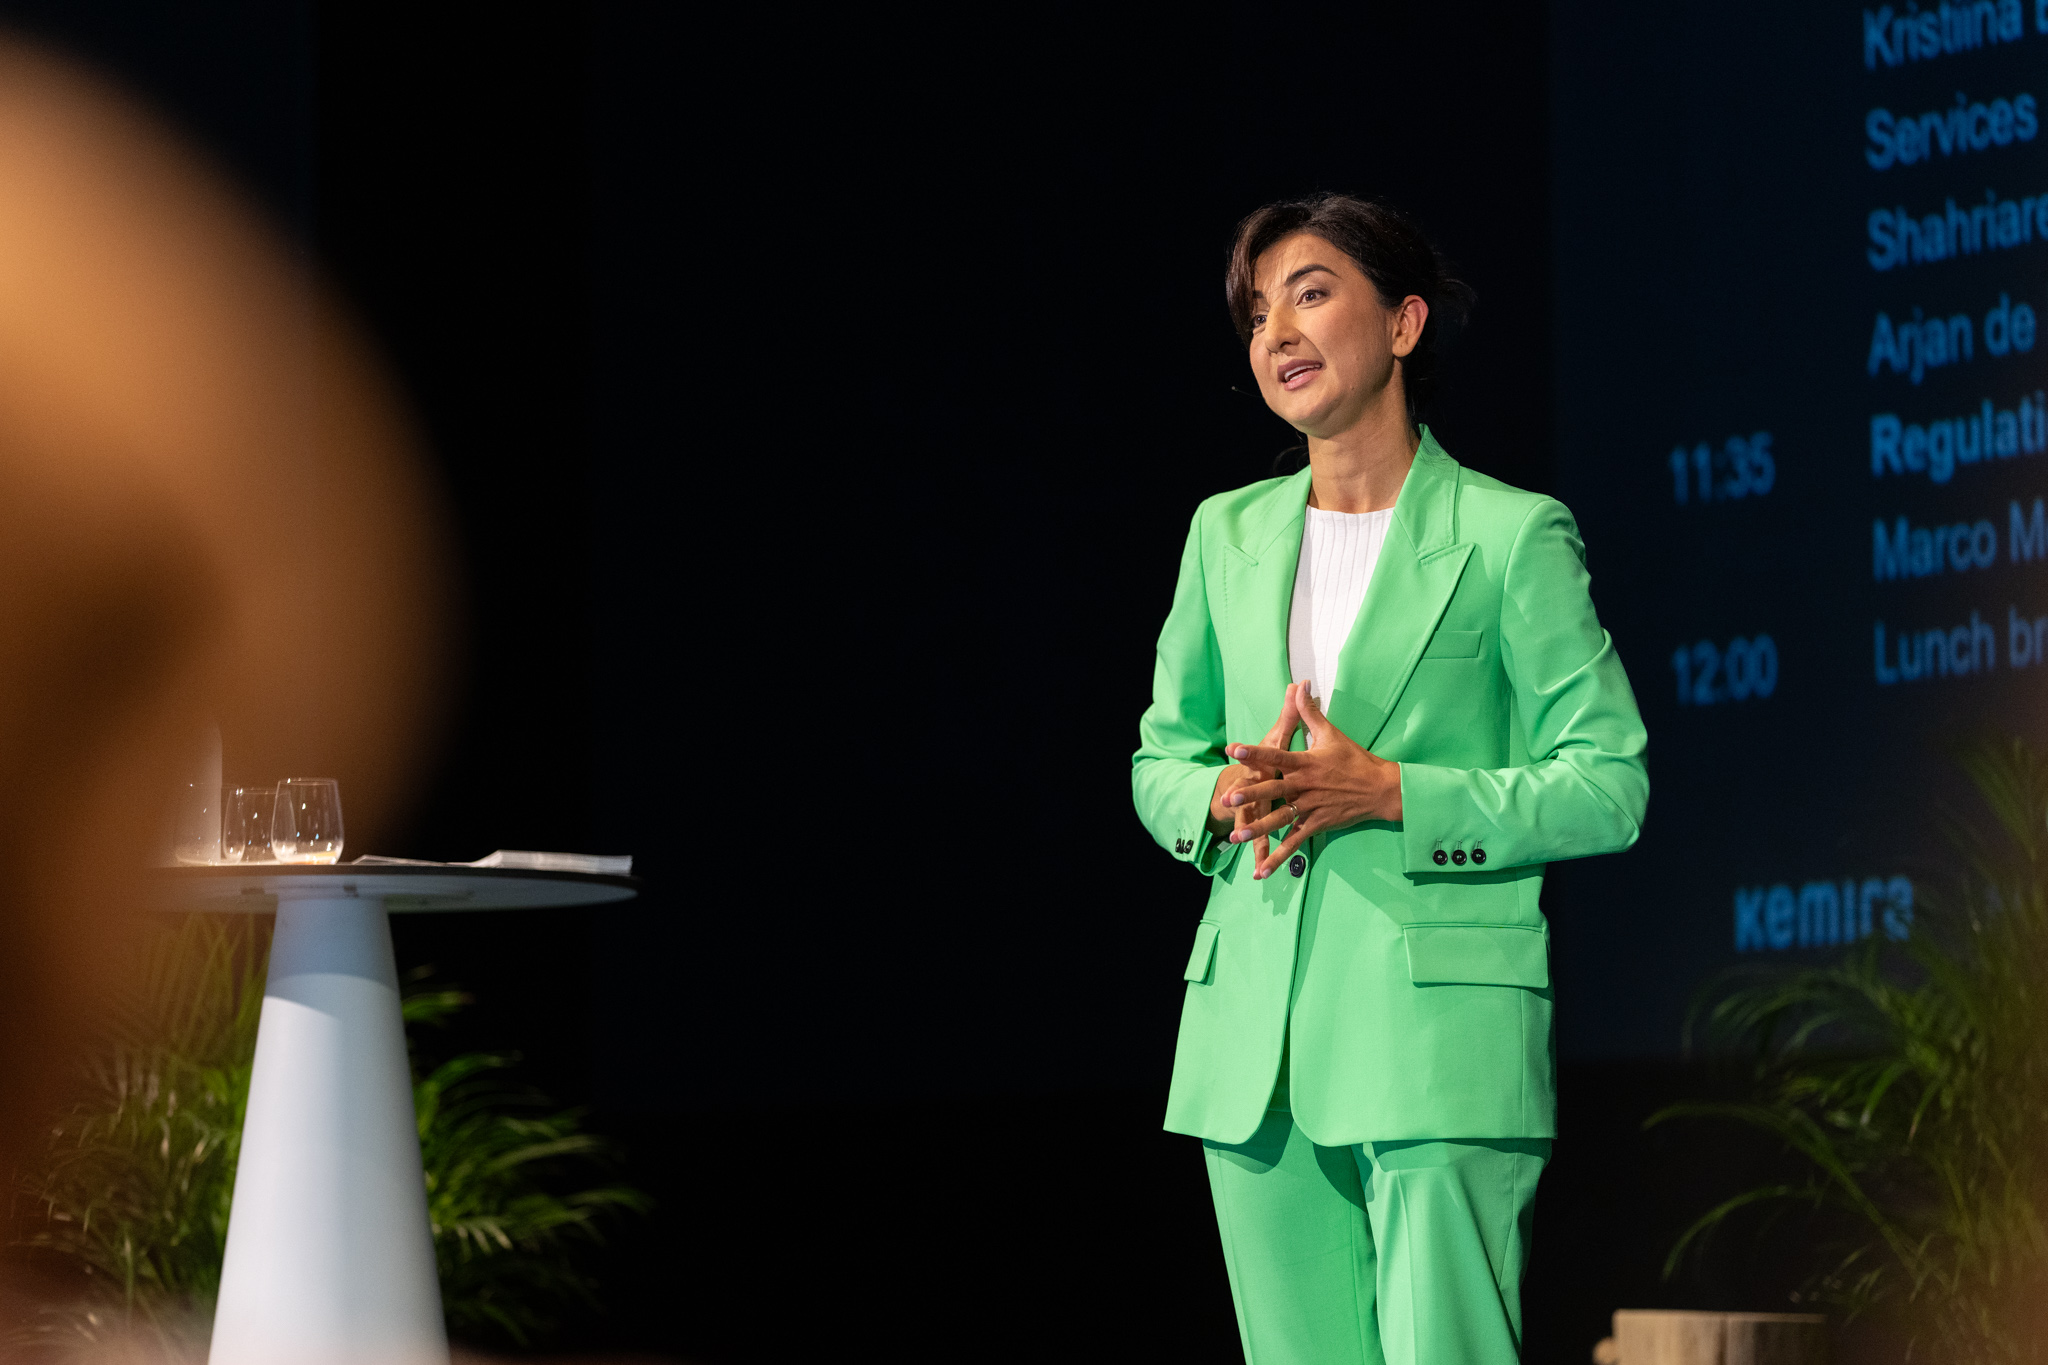 Kamilla standing on stage in a green suit hosting talk.